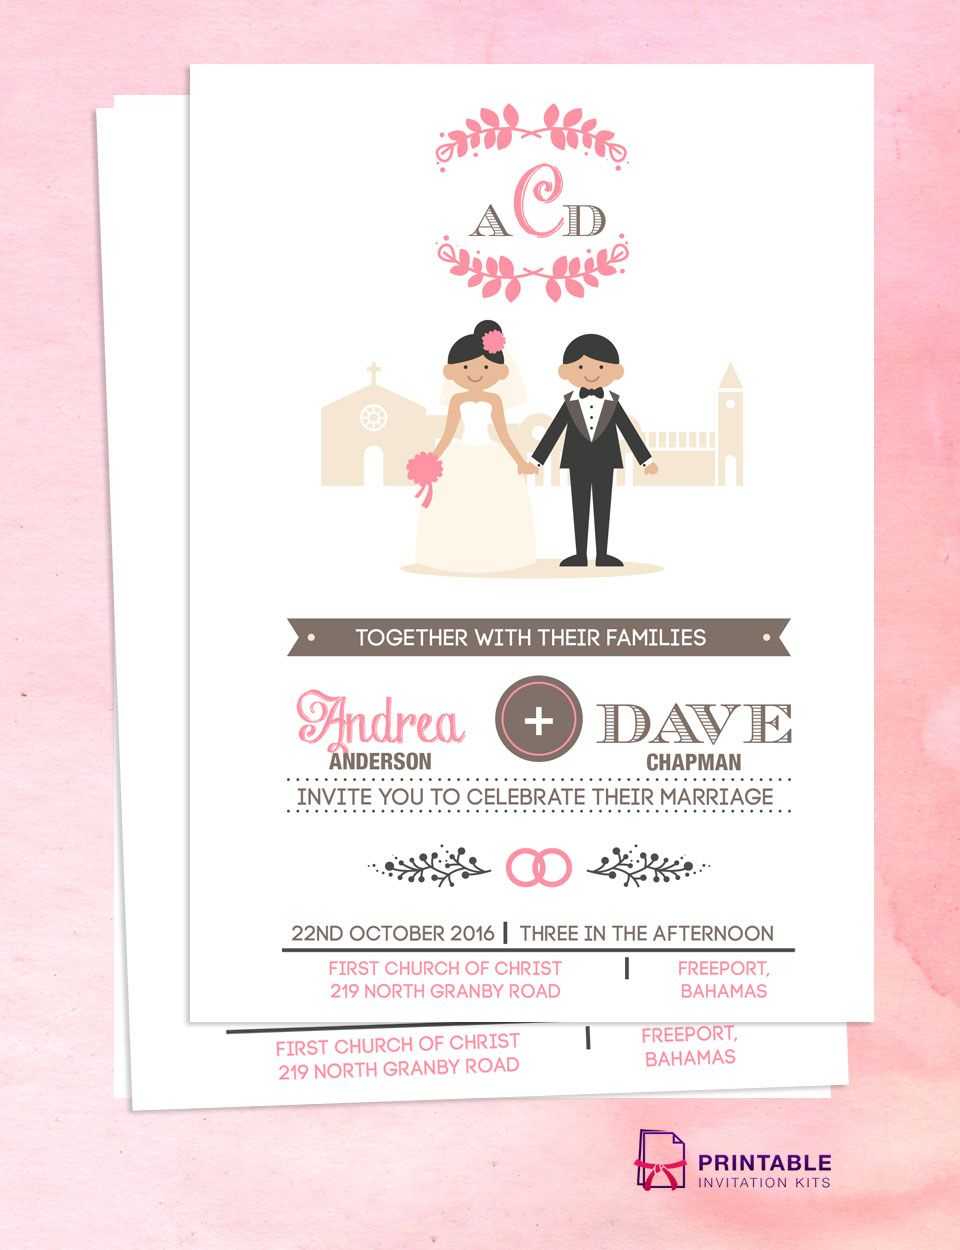 Illustrated Couple In Front Of Church Wedding Invitation For Church Wedding Invitation Card Template